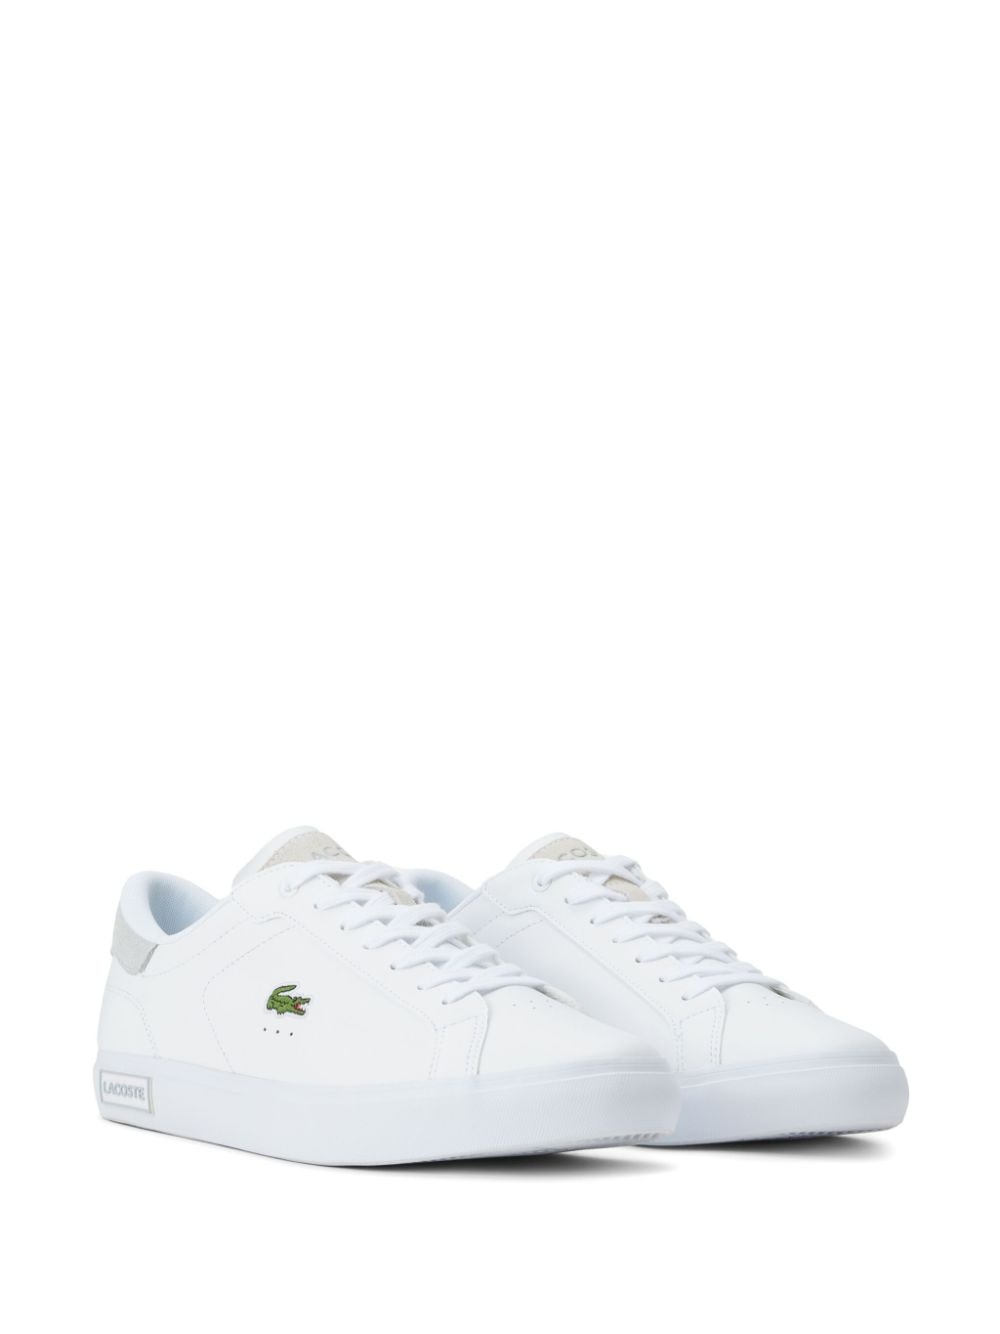 Lacoste Powercourt leather sneakers White